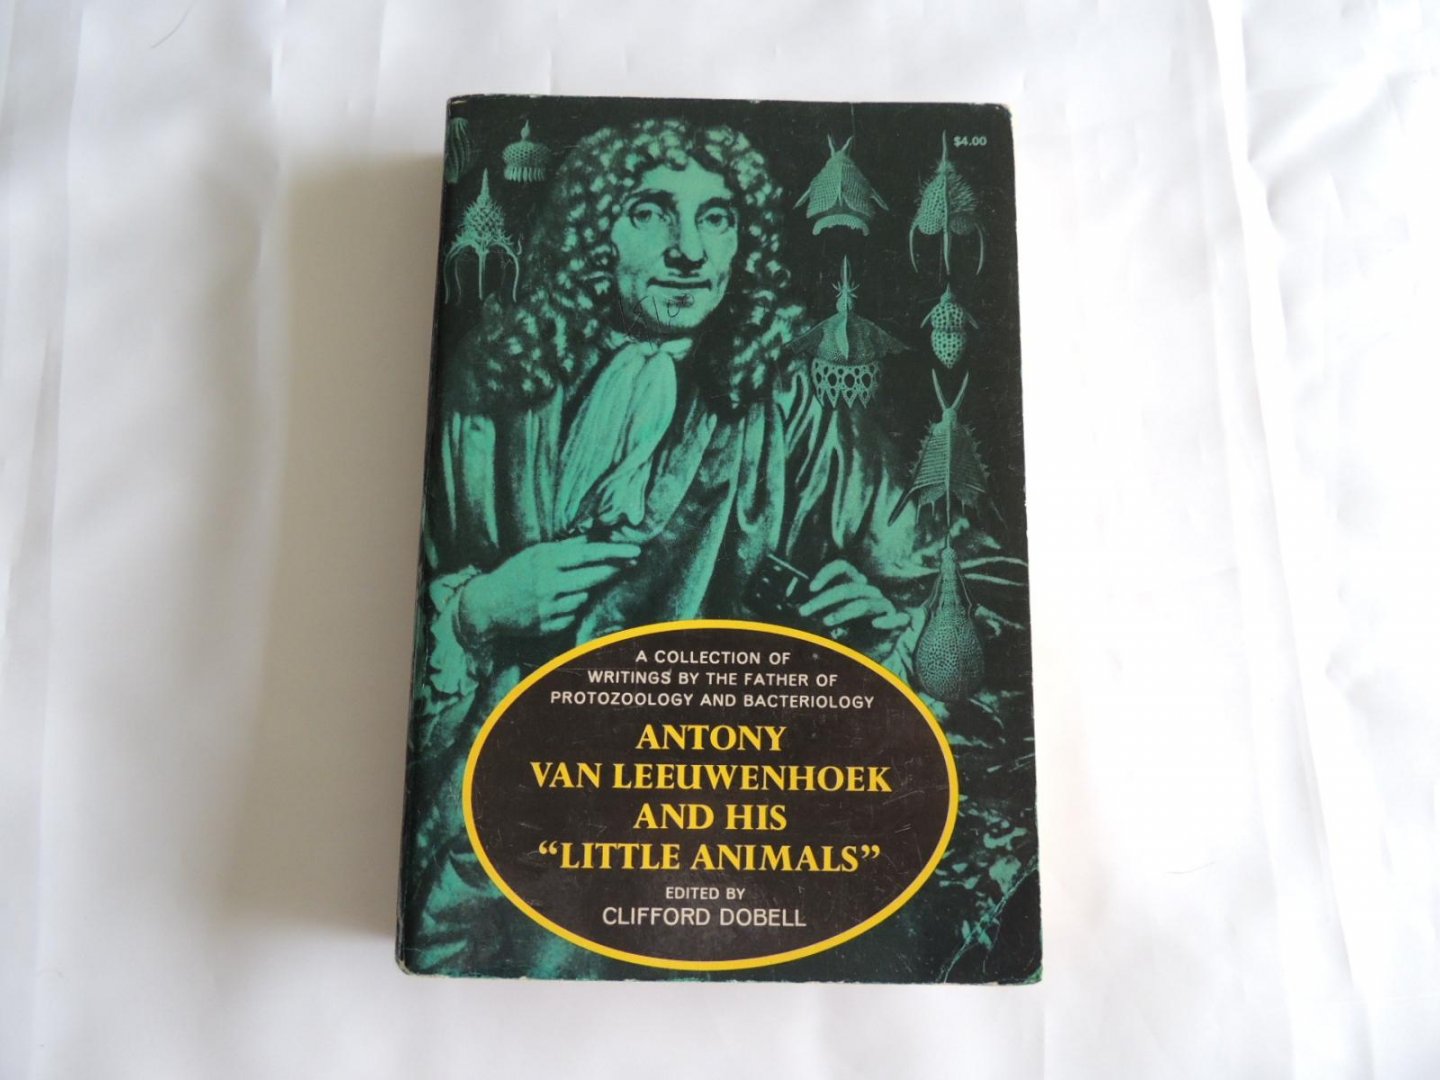 Dobell, Clifford - ANTONY VAN LEEUWENHOEK AND HIS LITTLE ANIMALS  - Being Some Account of the Father of Protozoology and Bacteriology and His Multifarious Discoveries in These Disciplines